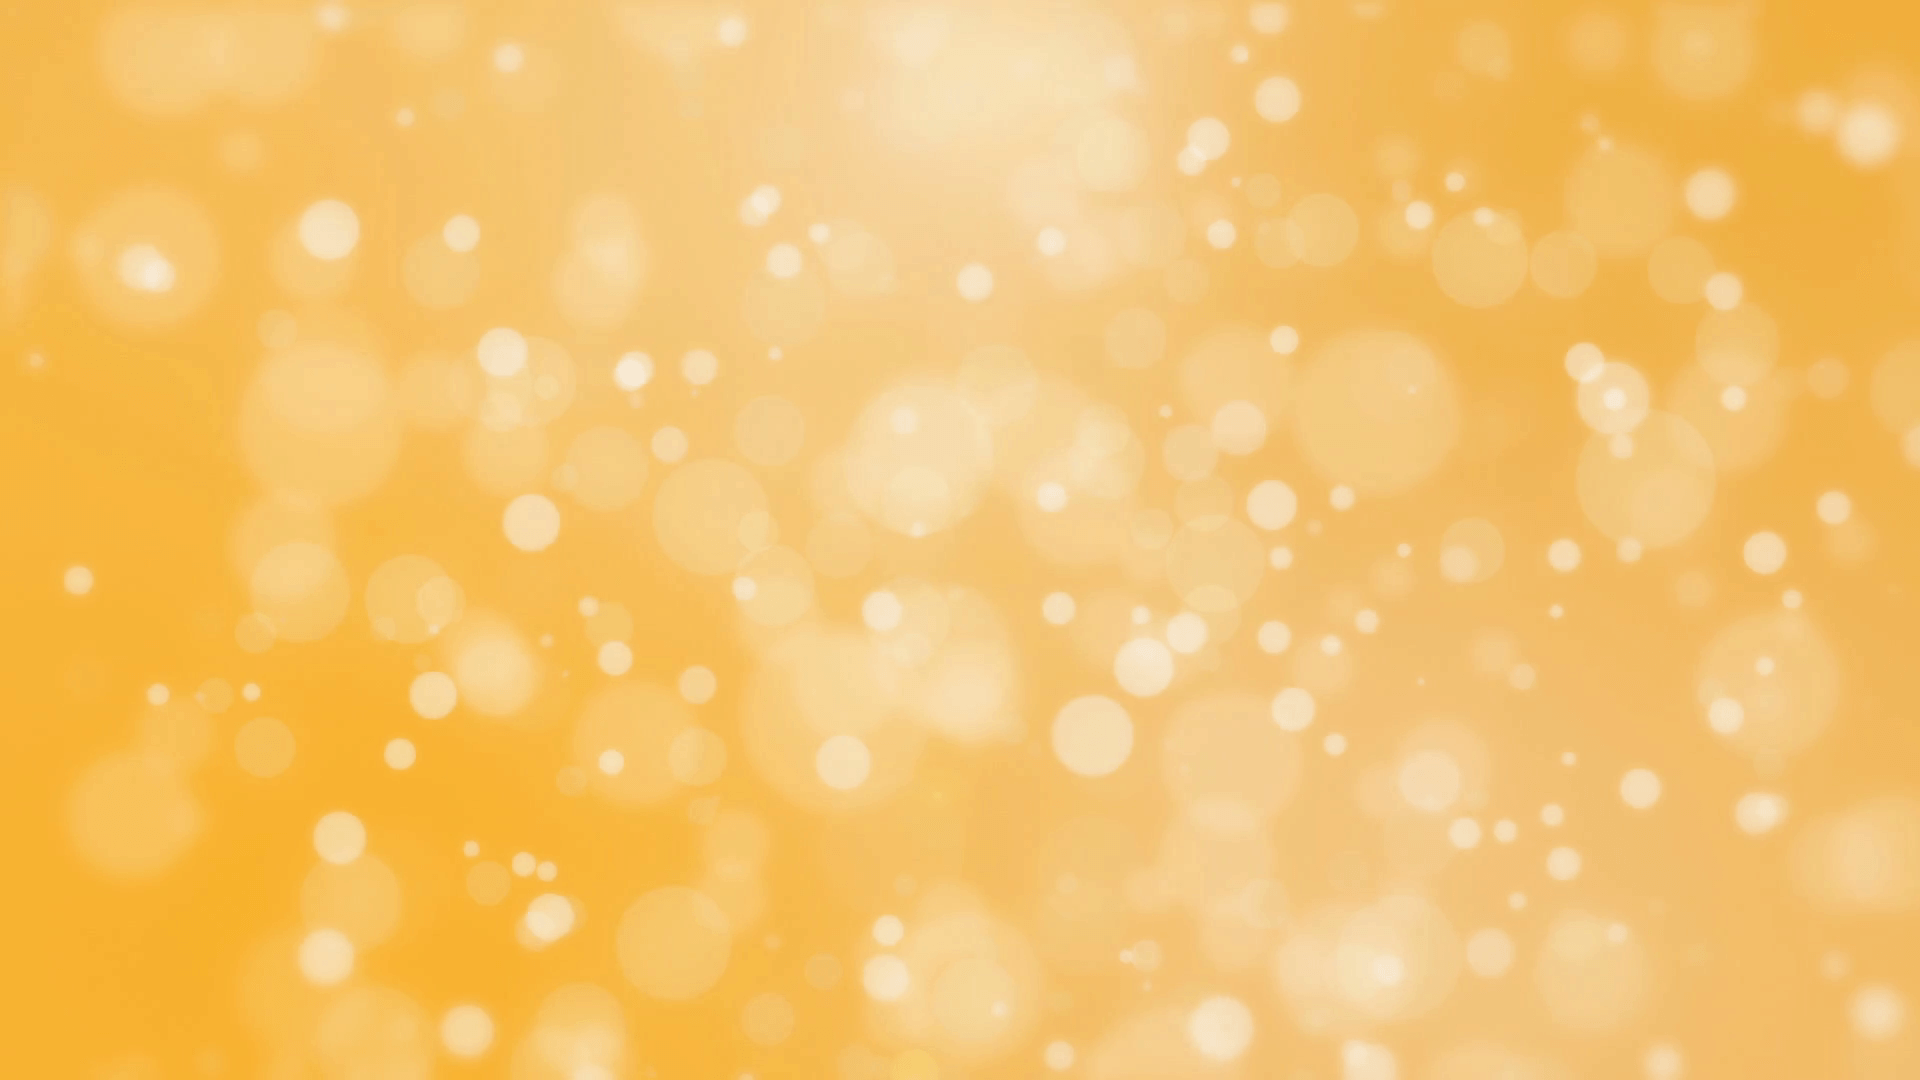 Beautiful golden yellow background with glowing light particles